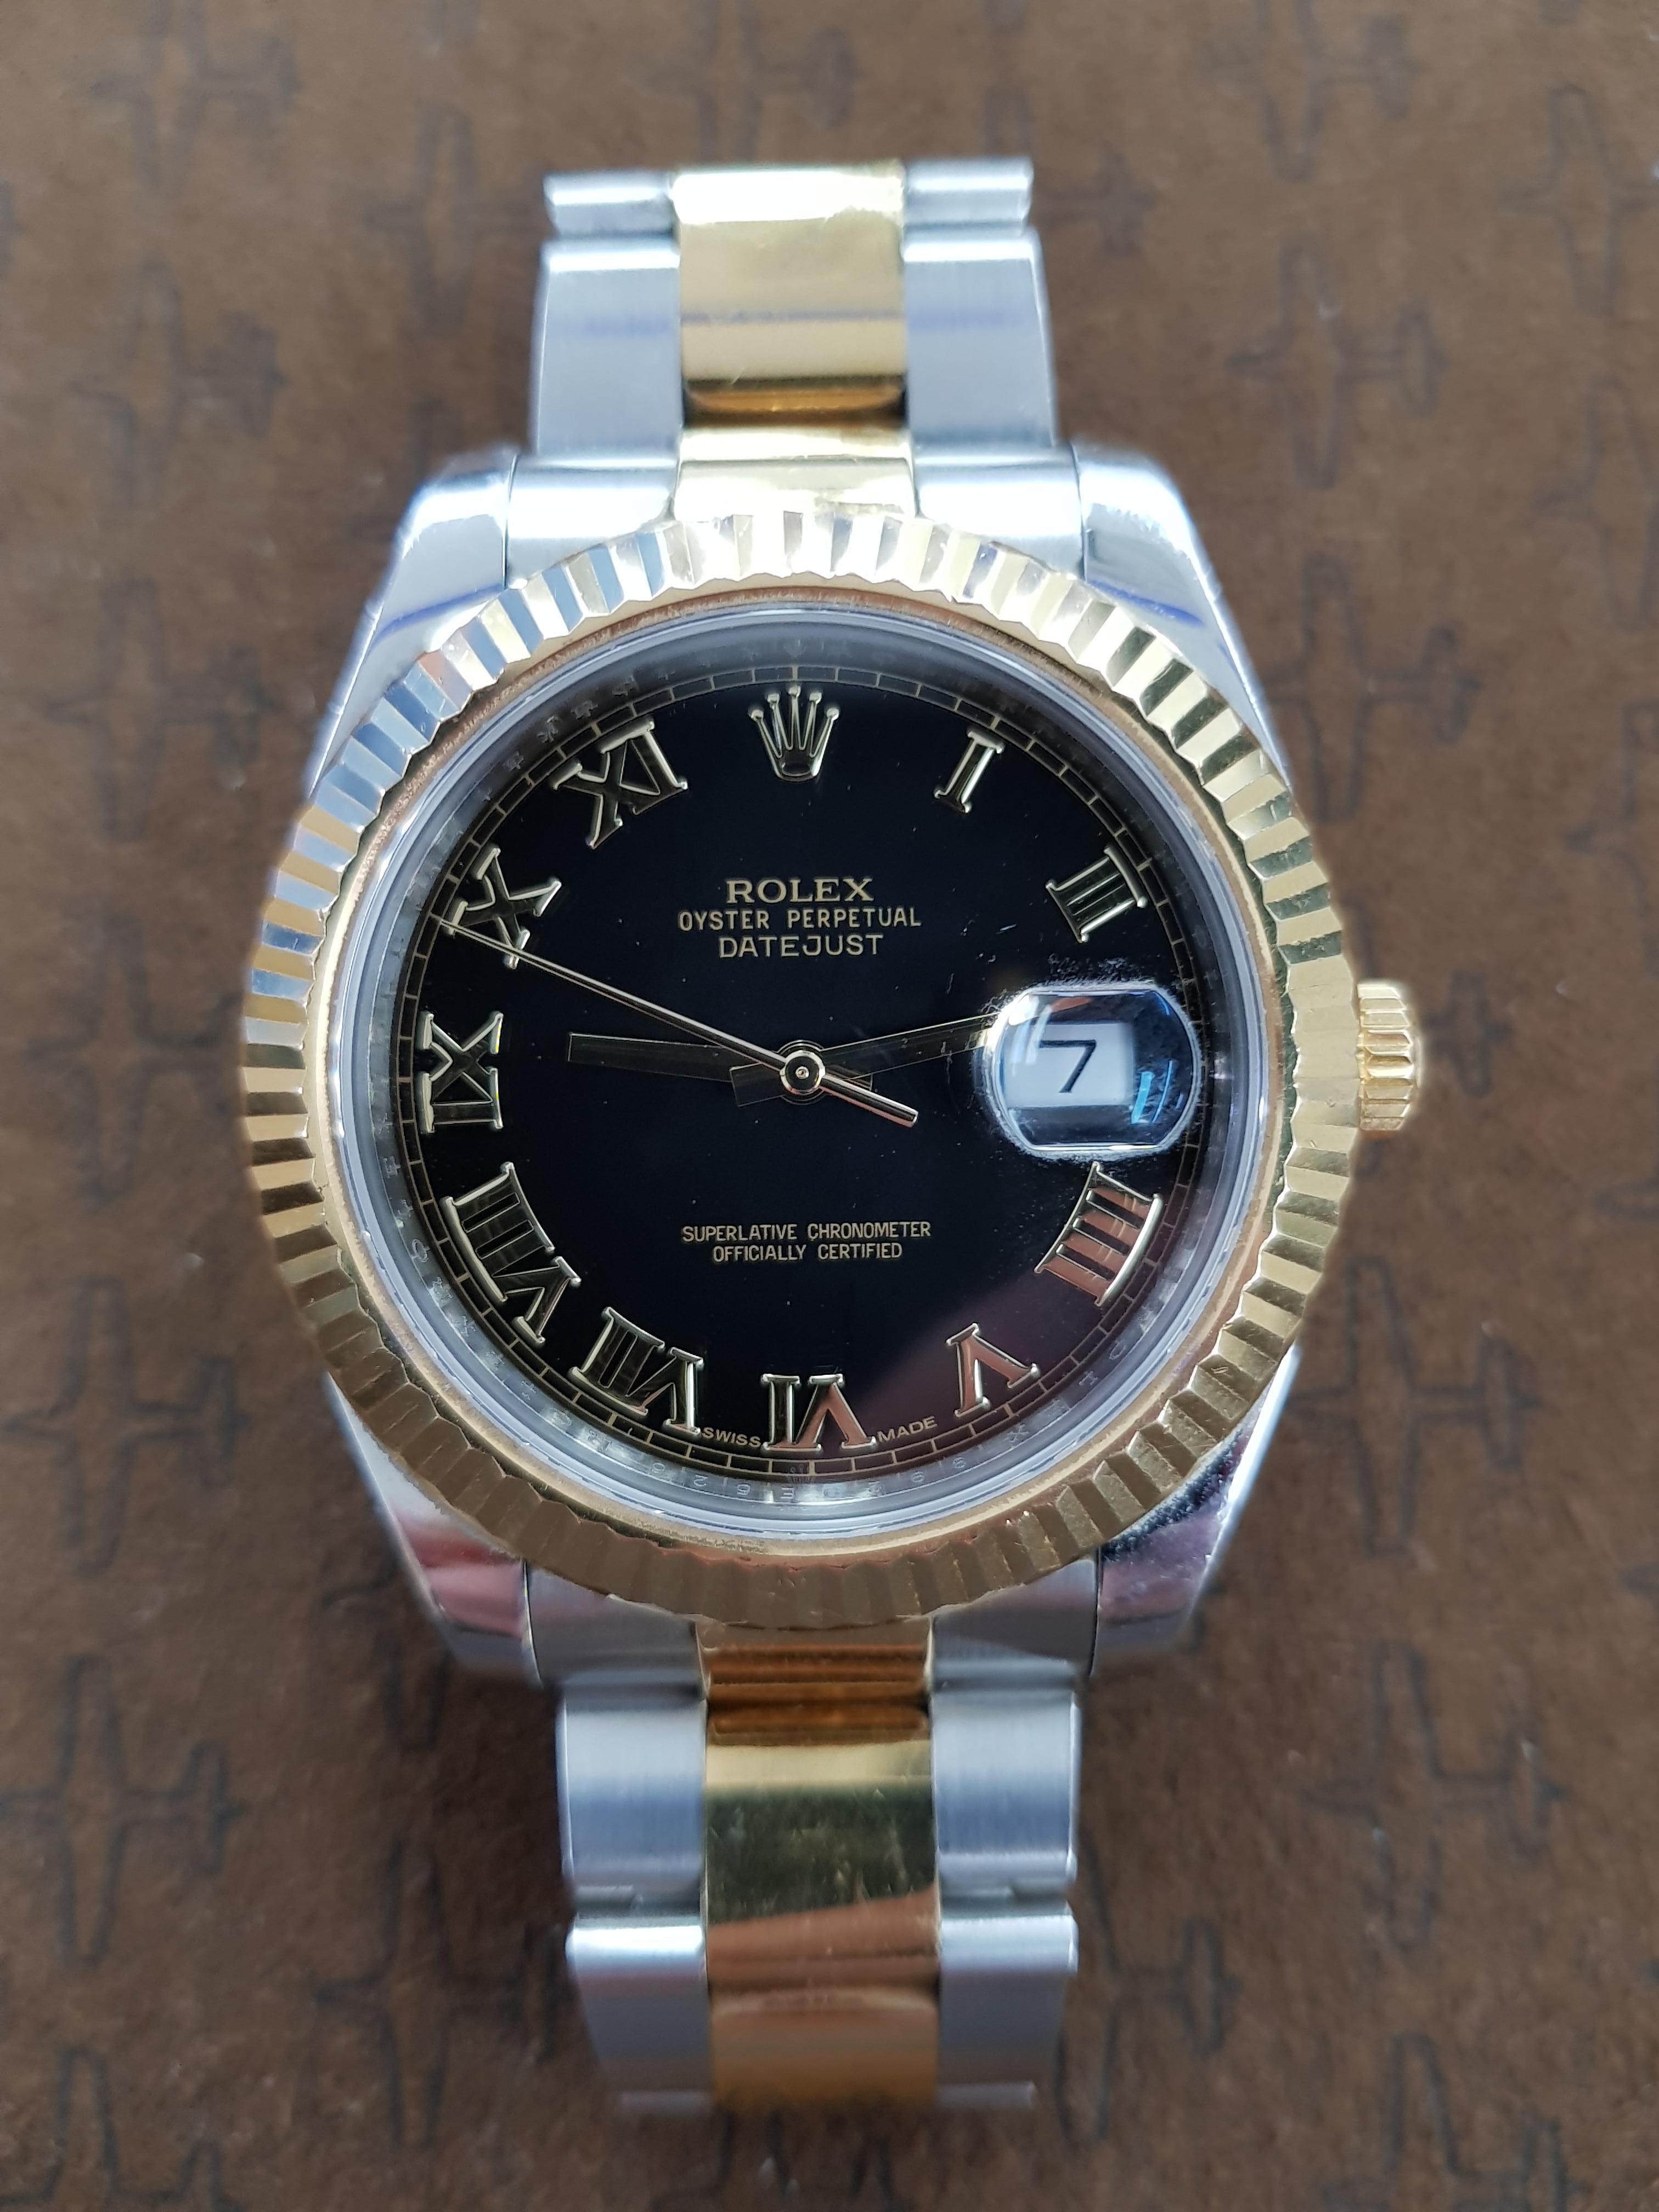 Rolex Date Just 2 in bi-metal stainless steel and yellow gold with a black dial and 41 mm fluted bezel. This watch comes with full Rolex certification.